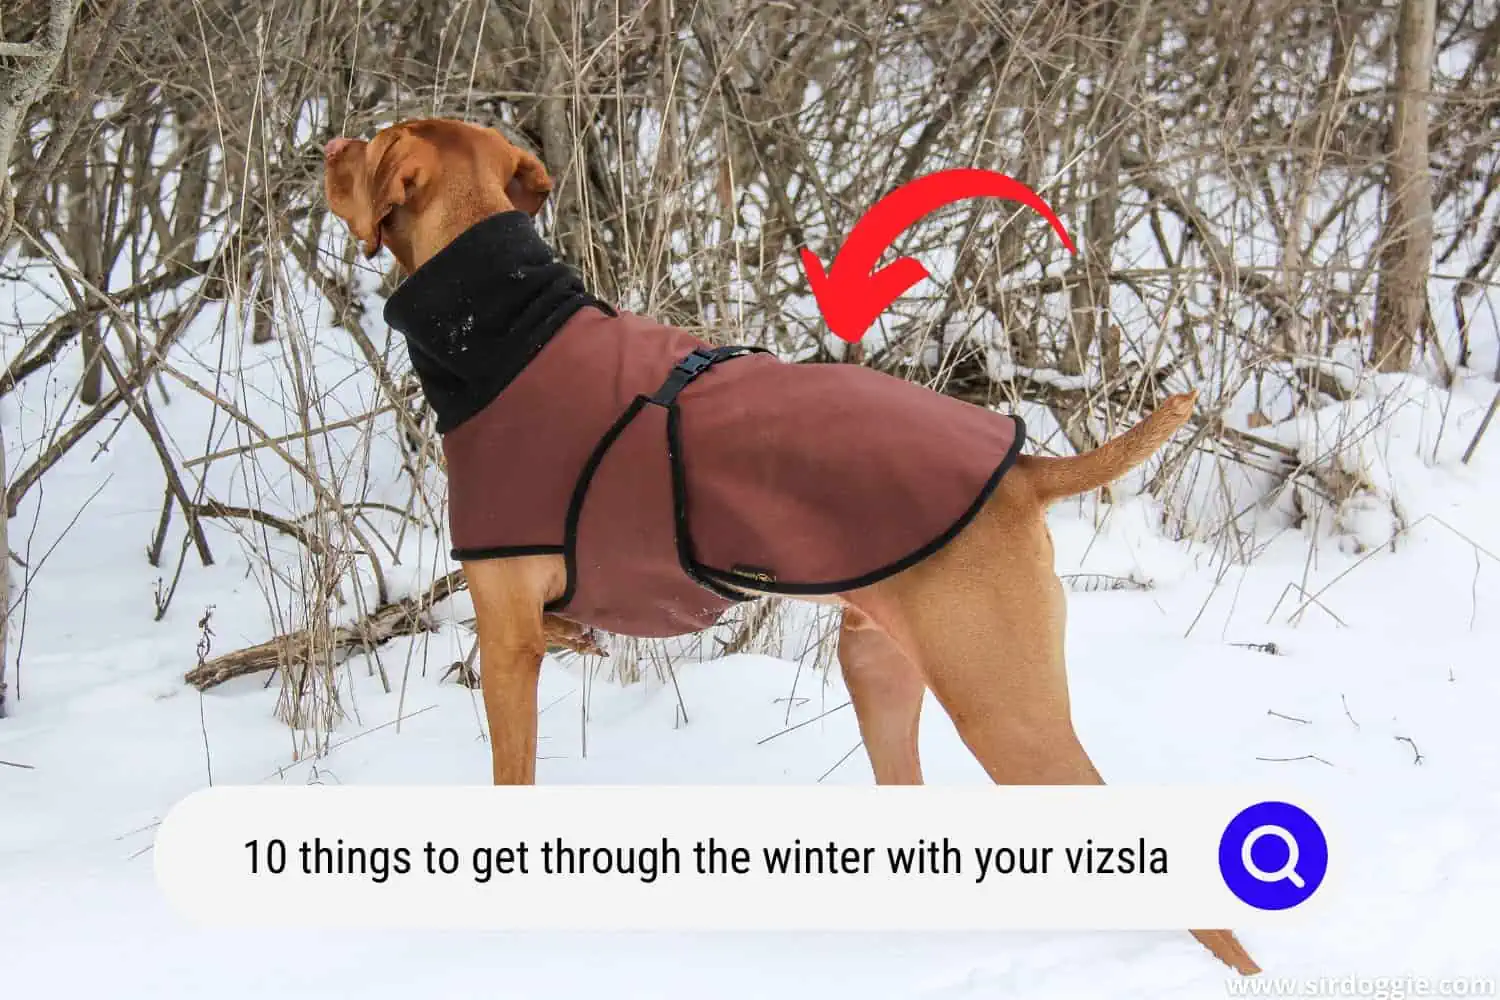 Vizsla dog wearing a winter jacket while walking in the snow